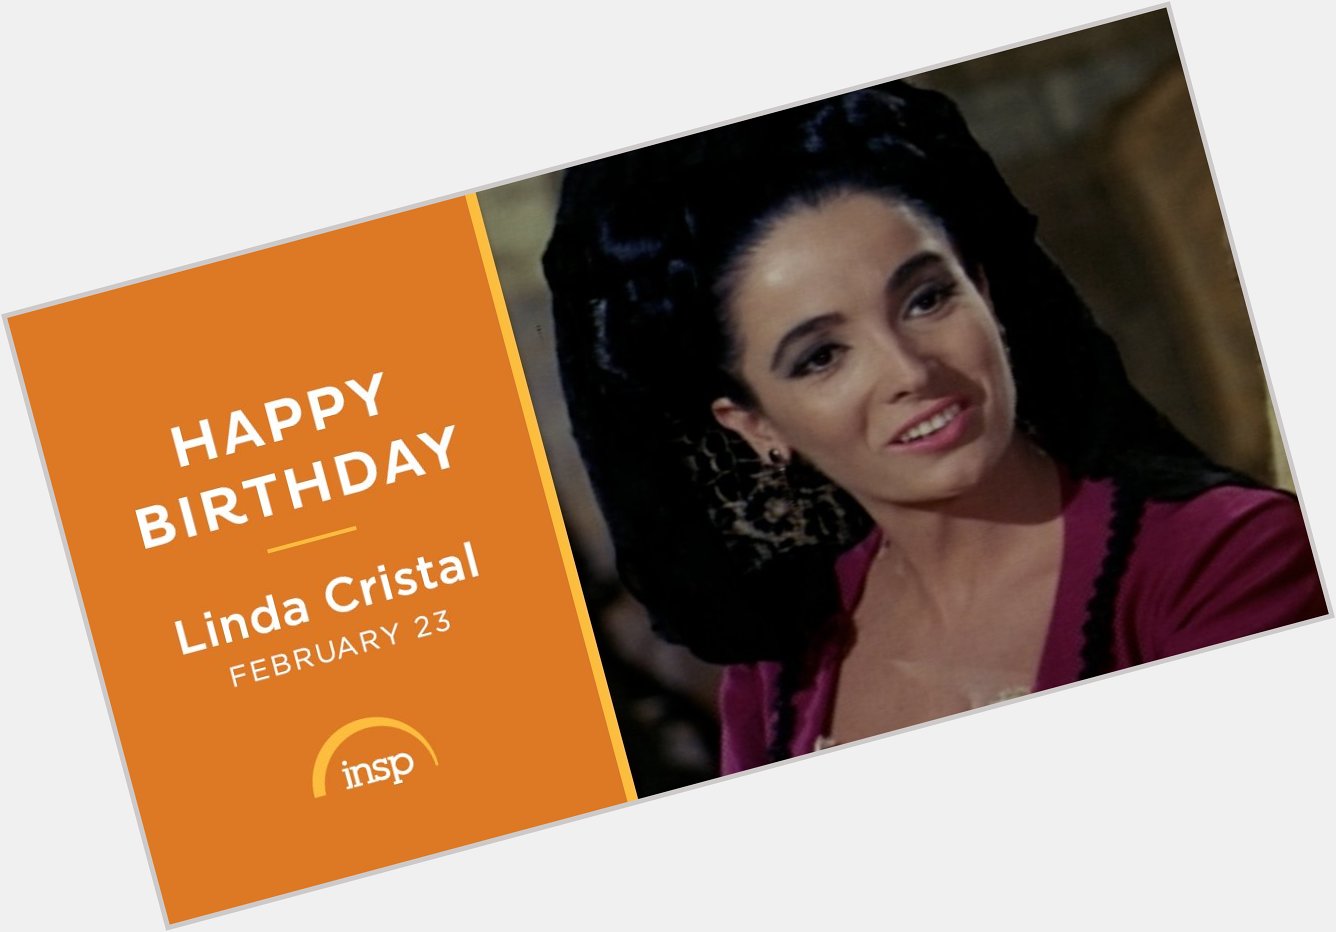 Happy birthday Linda Cristal! Watch the birthday girl this morning on at 7a and 8a ET. 